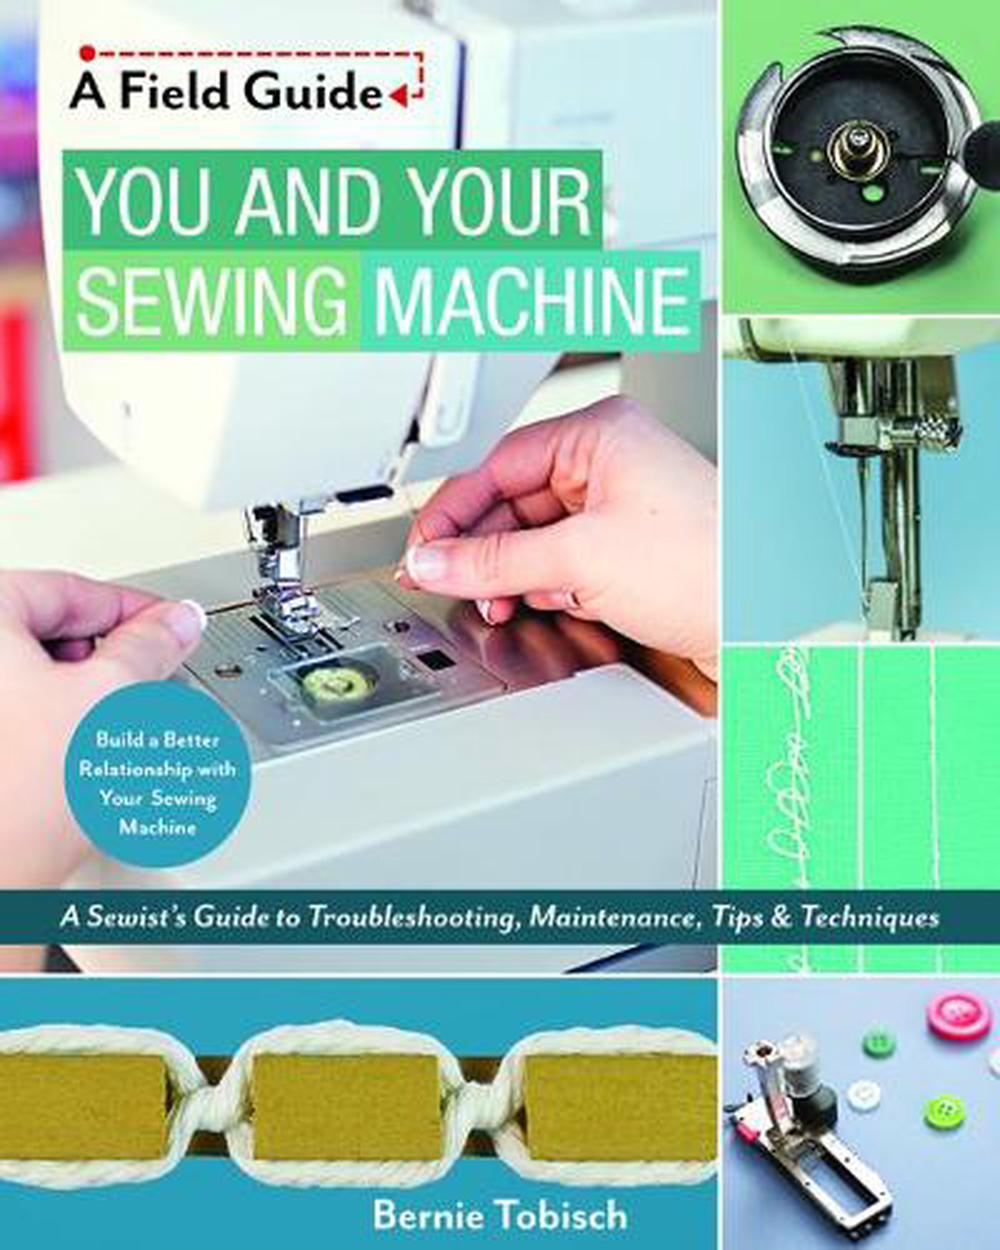 How to Maintain a Sewing Machine - Smart Reviewed